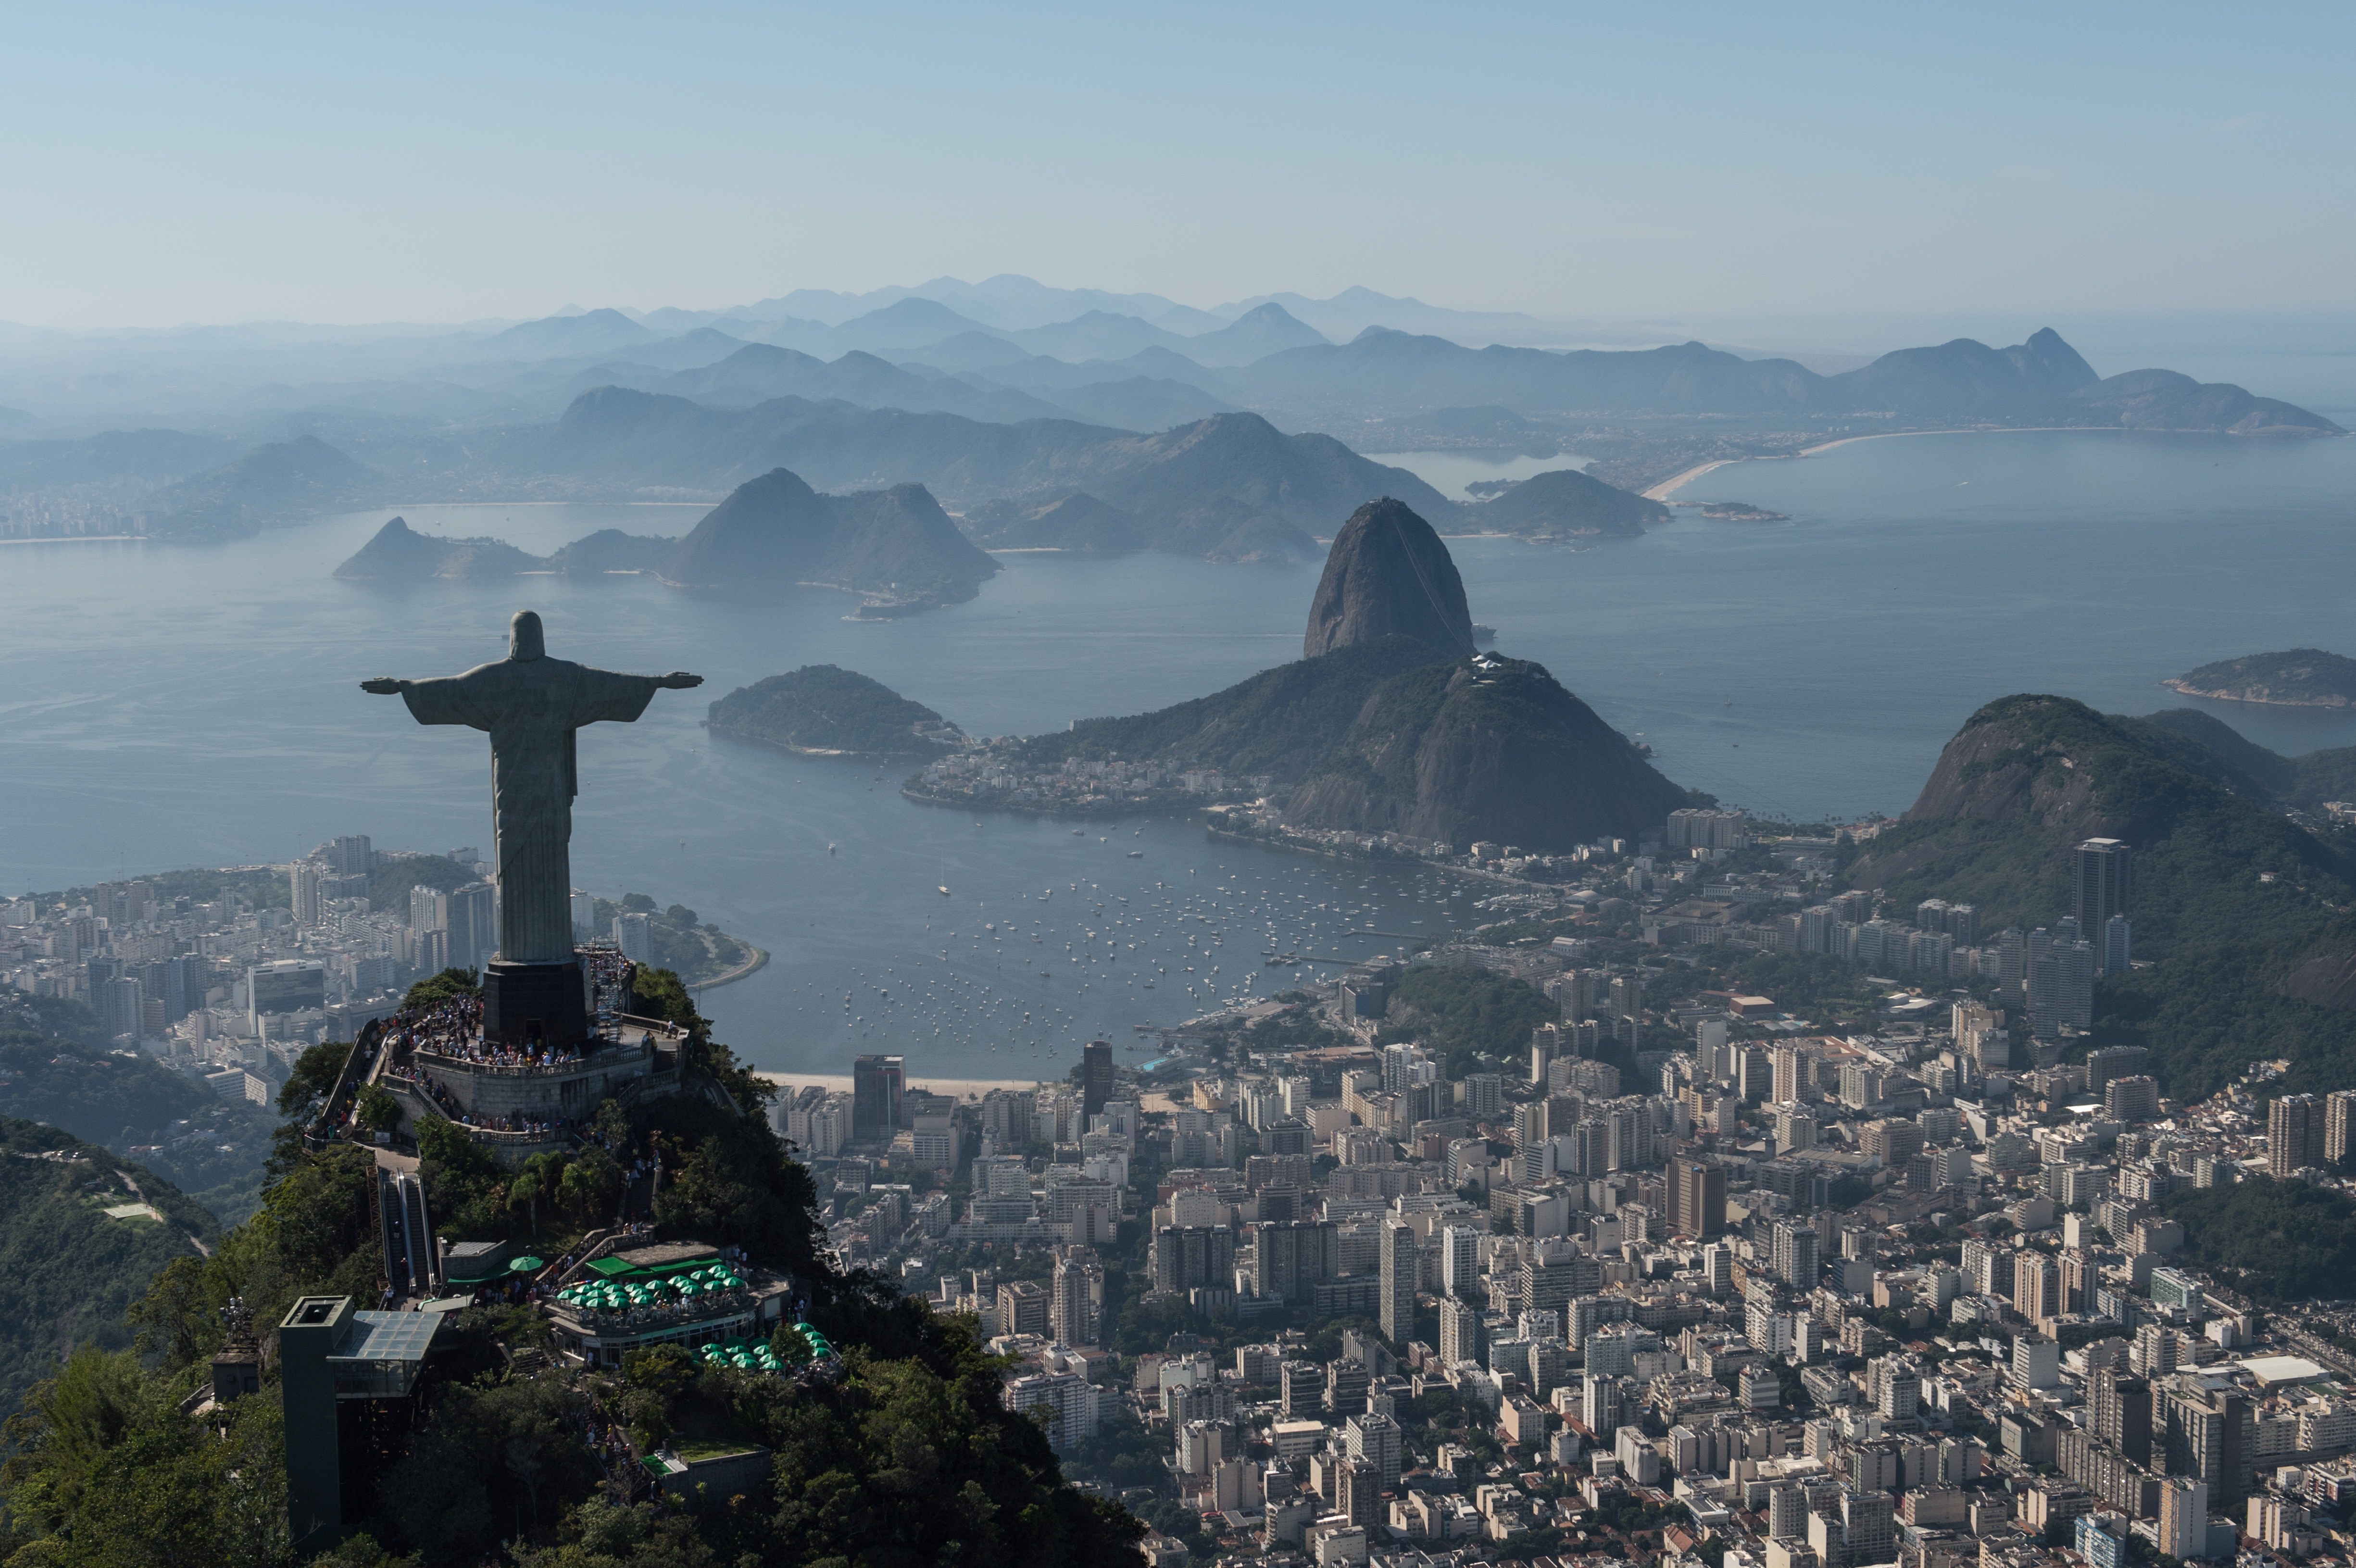 Aerial view of Christ the Redeemer statue, in Rio de Janeiro, Brazil, on June 26, 2014. (Yasuyoshi Chiba/AFP/Getty Images)